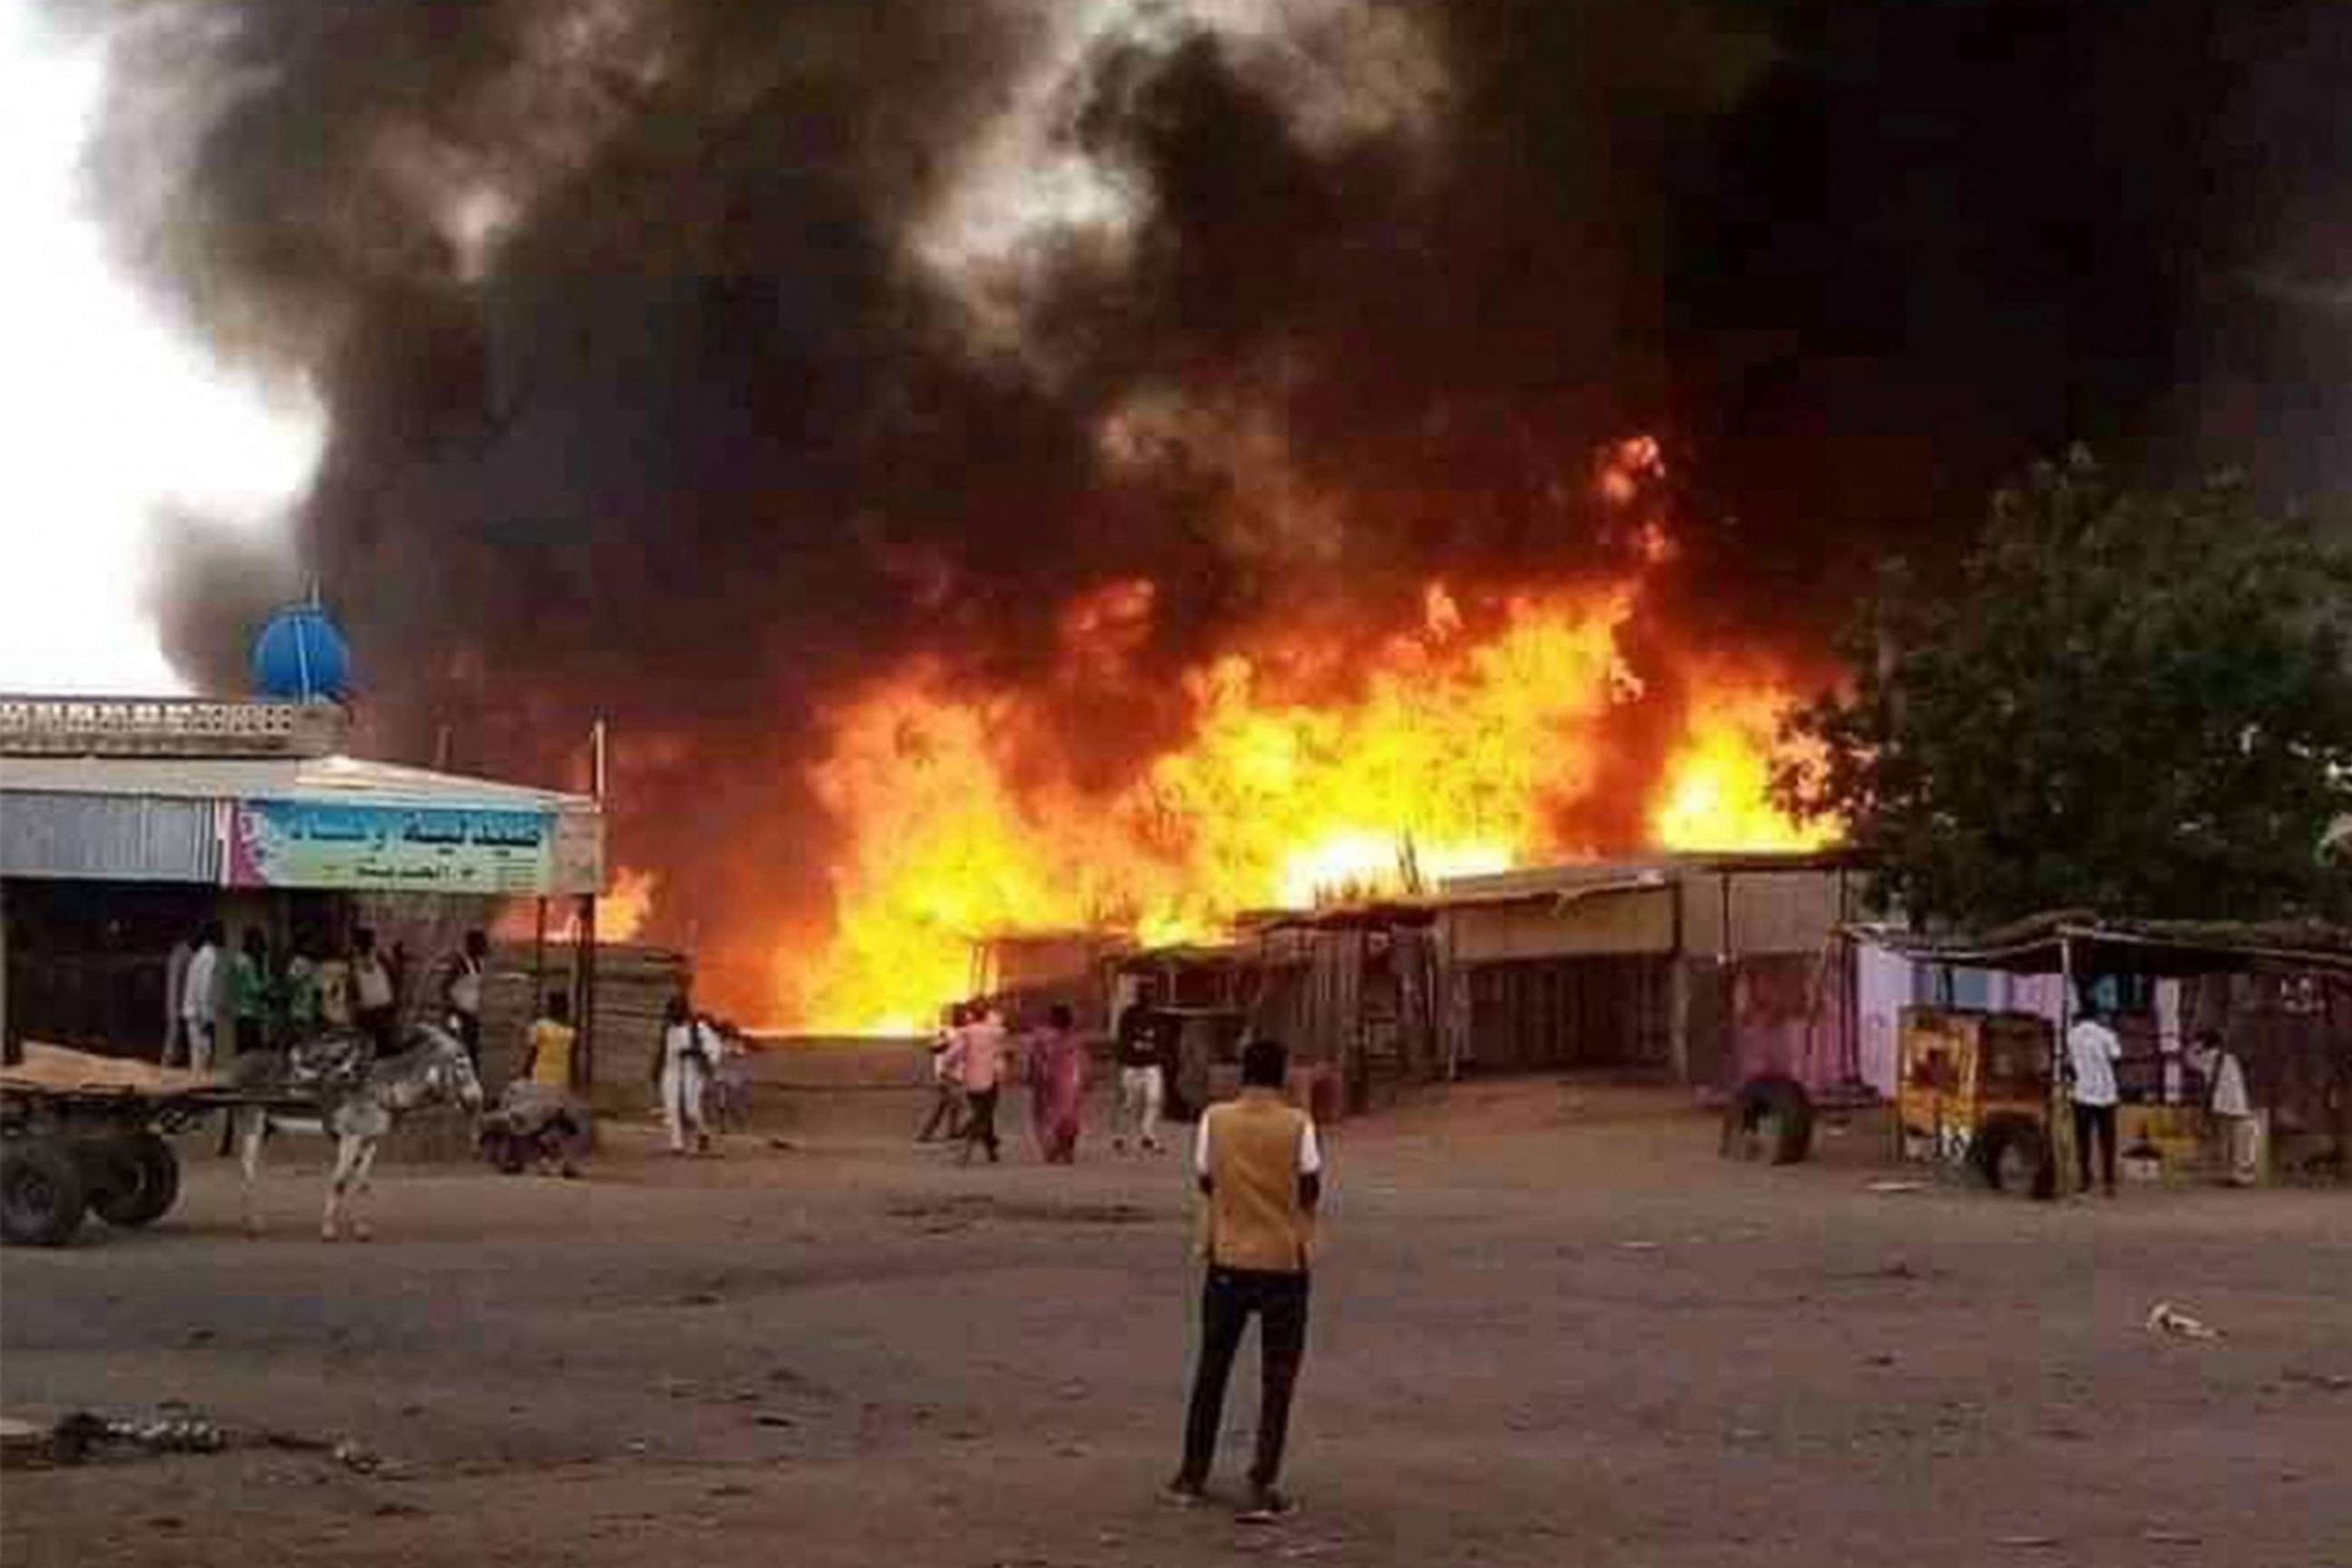 PHOTO: A man stands by as a fire rages in a livestock market area in al-Fasher, the capital of Sudan's North Darfur state, on September 1, 2023, in the aftermath of bombardment by the paramilitary Rapid Support Forces (RSF).